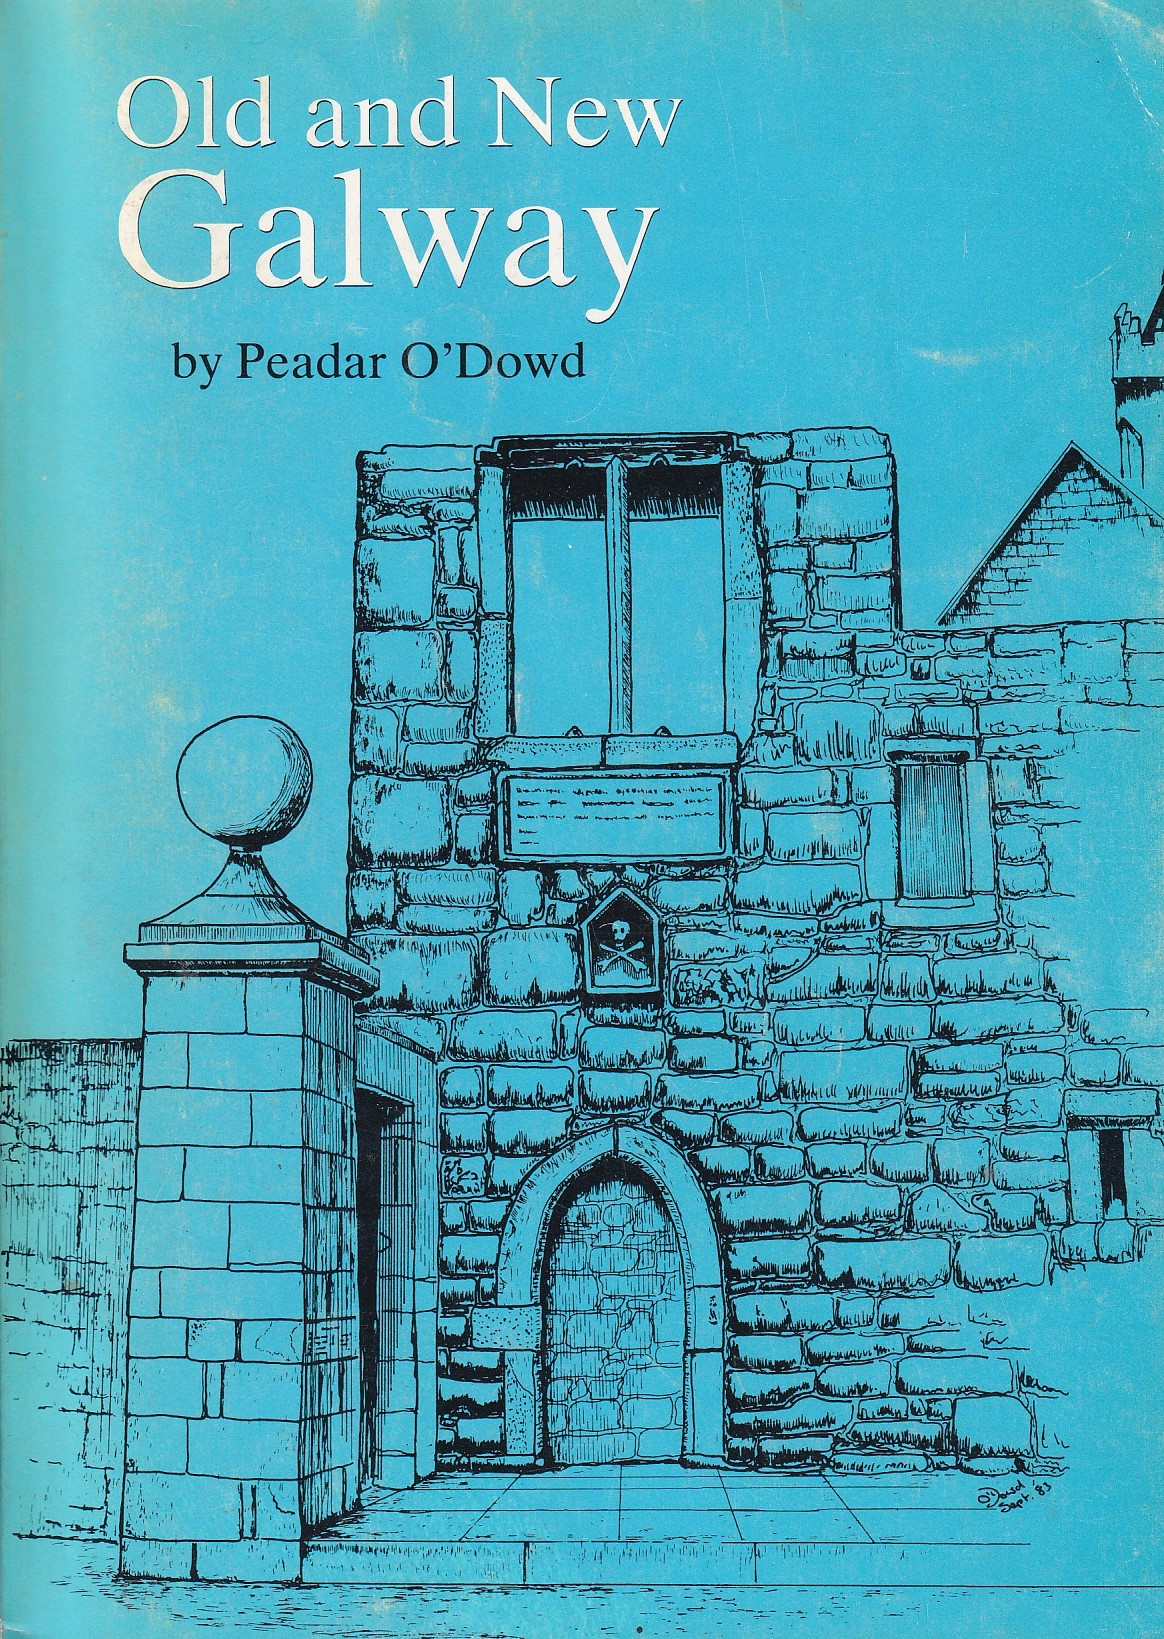 Old and New Galway [Signed] by Peadar O'Dowd